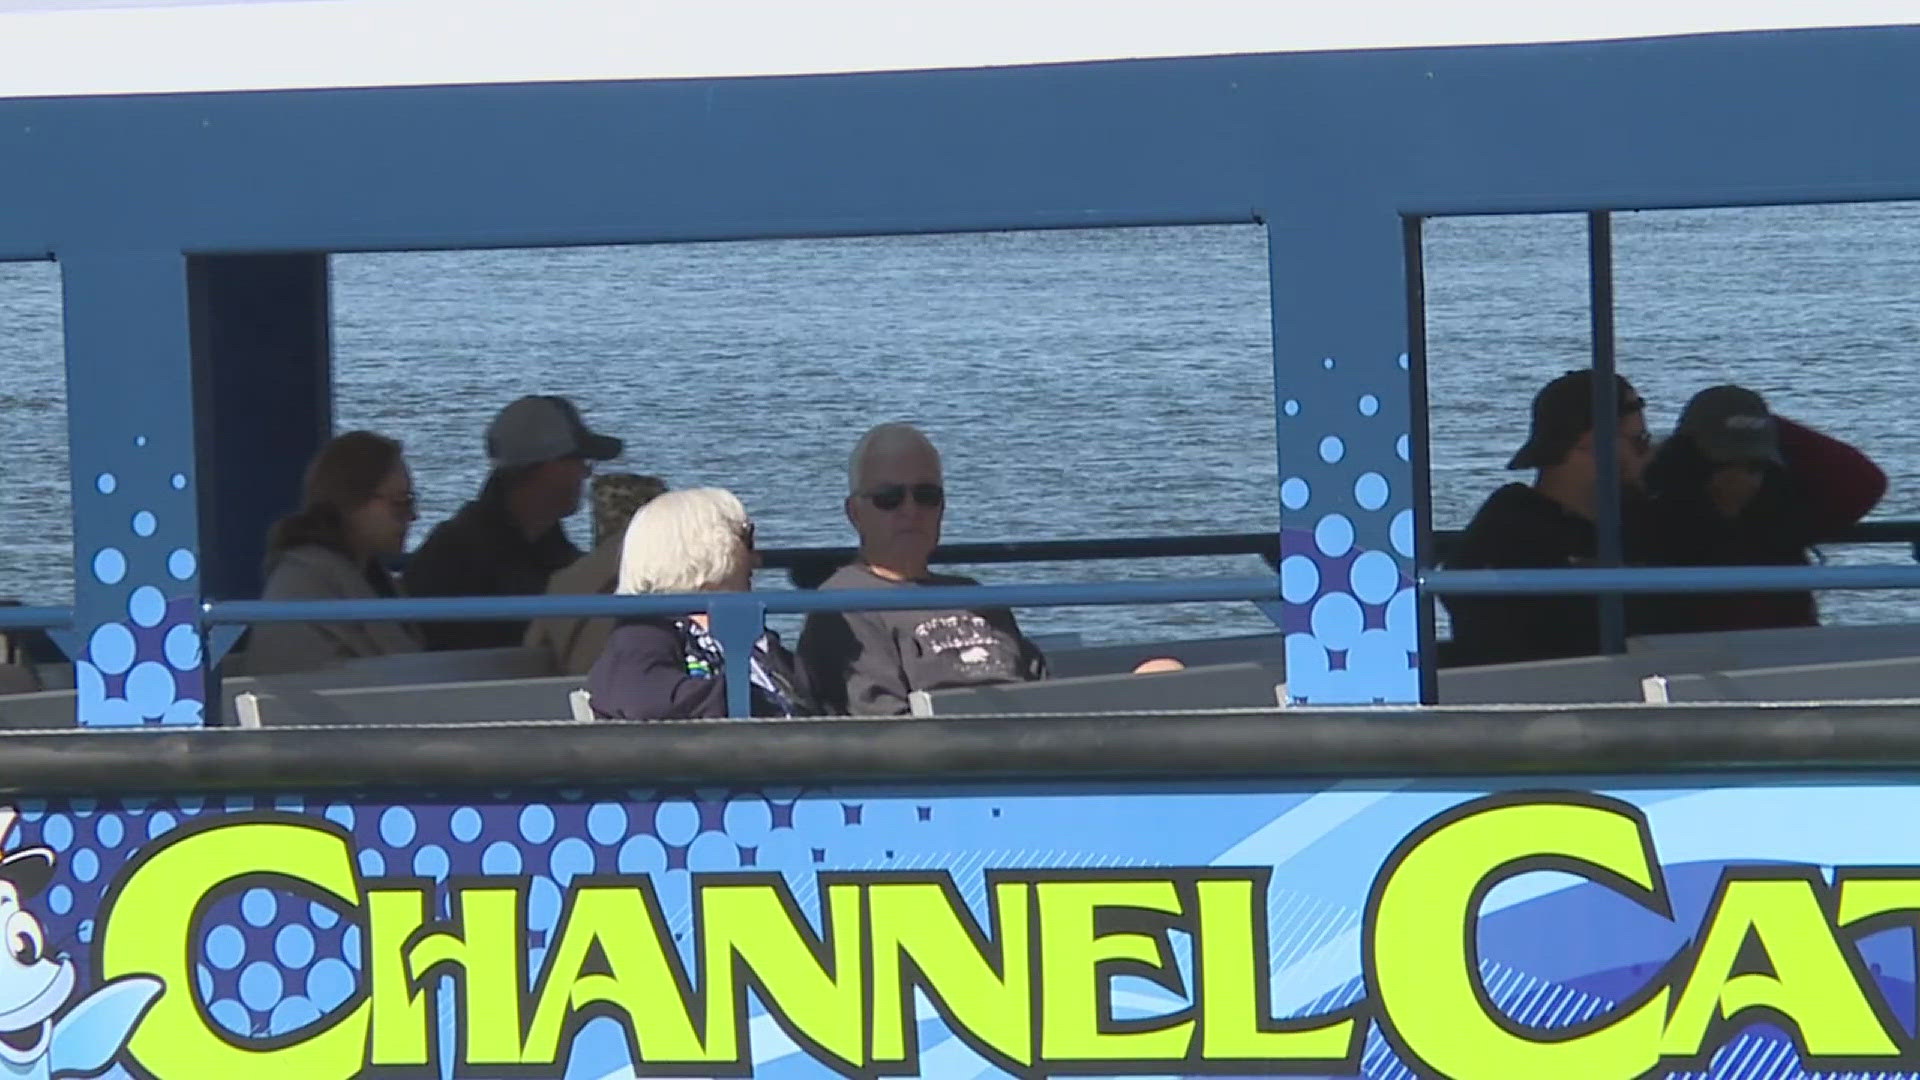 The water taxi will be available 7 days a week from May 24 to Labor Day.